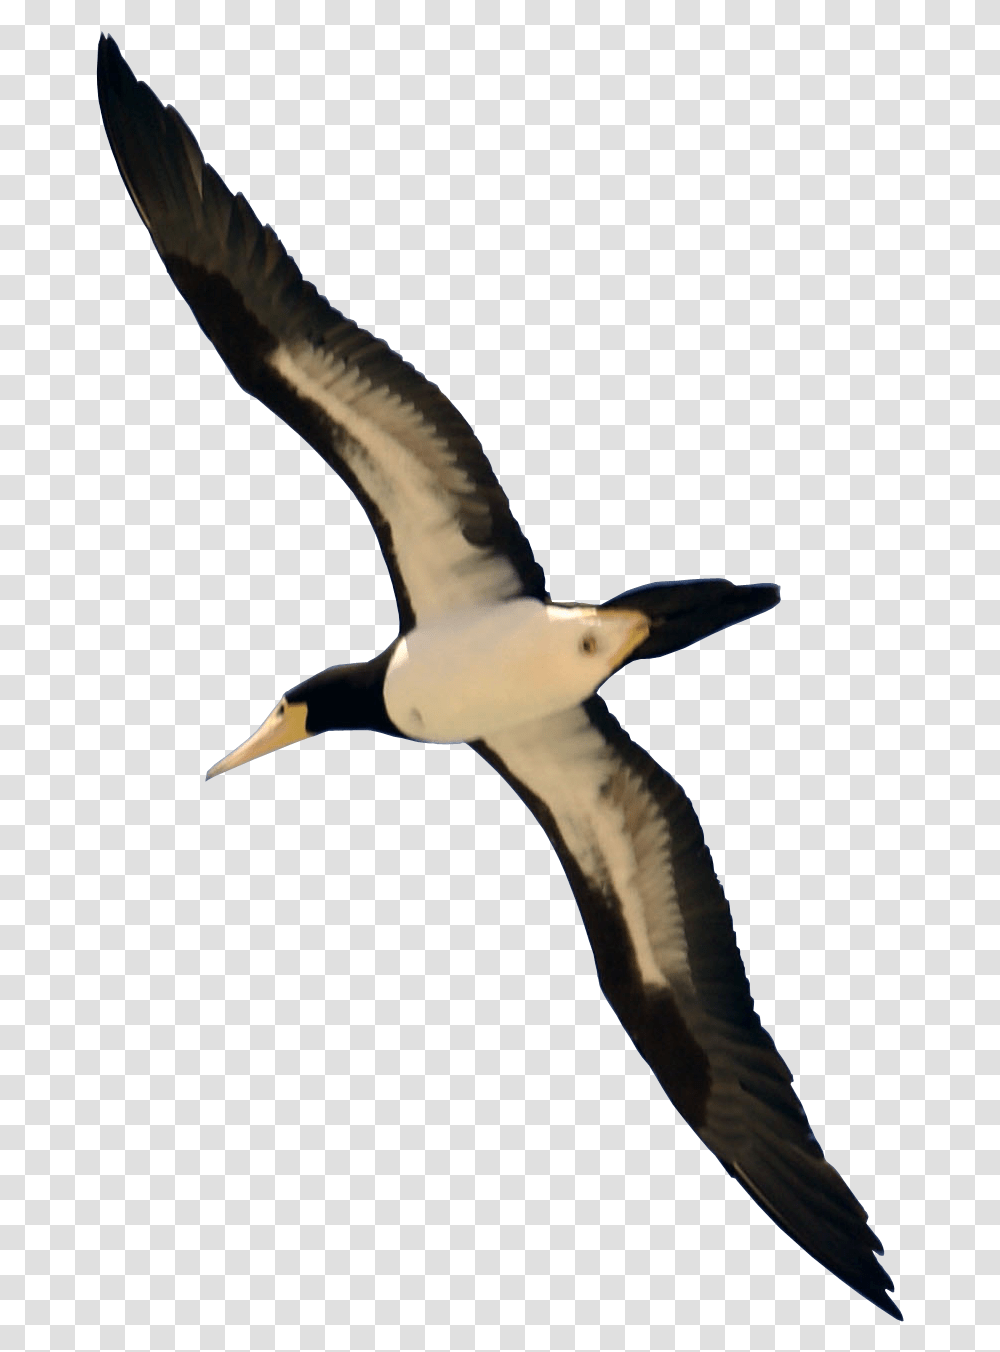 Download Bird Flying Image For Free Real Bird Flying, Animal, Albatross, Booby Transparent Png